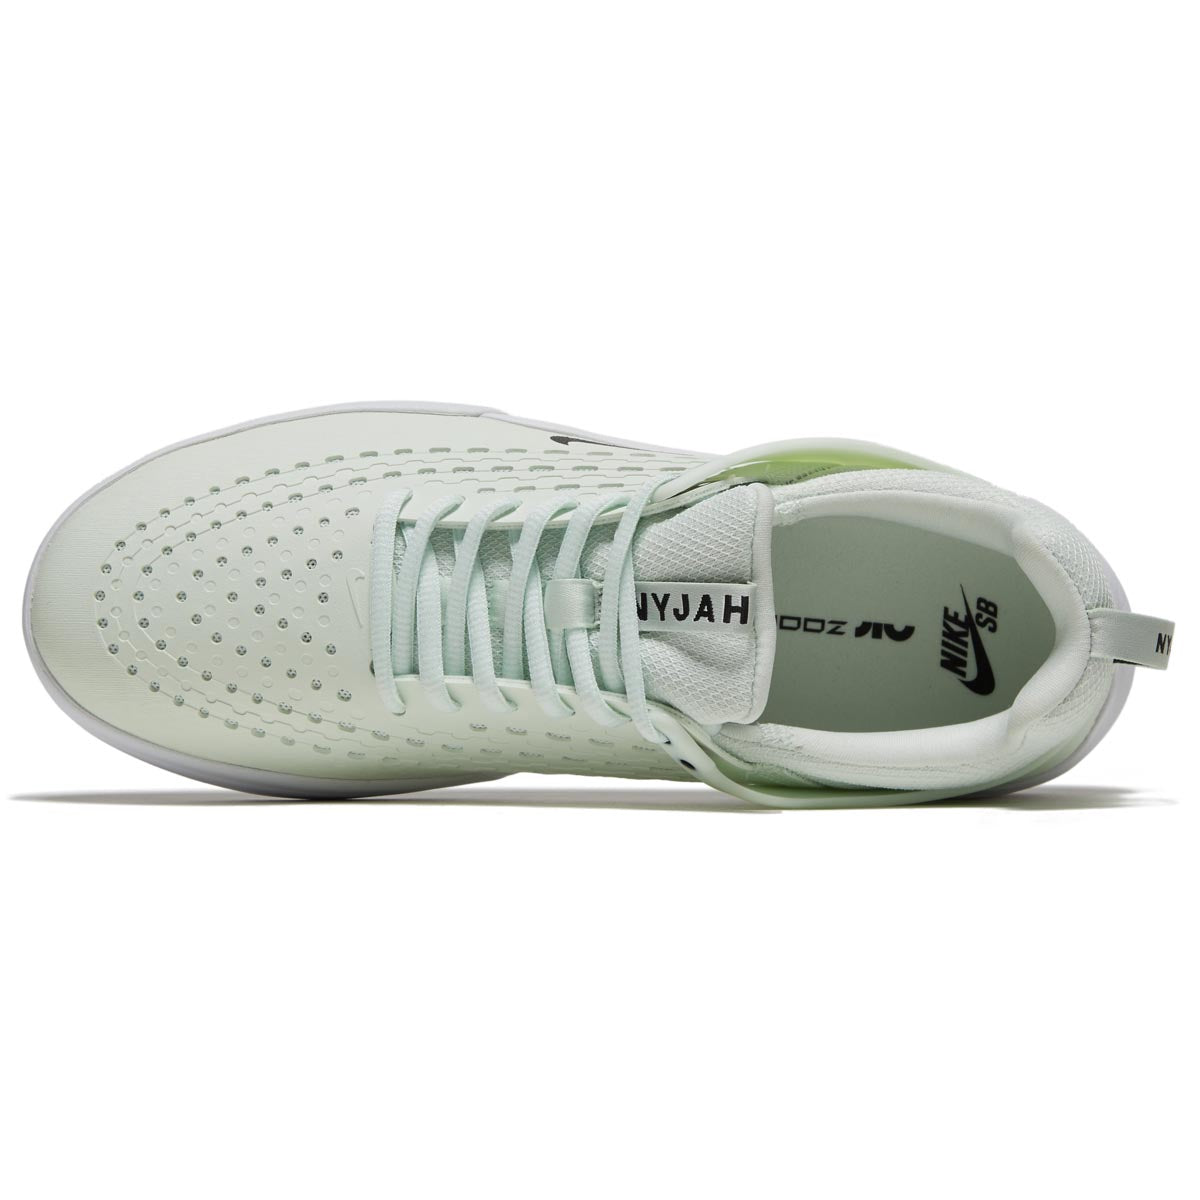 Nike SB Zoom Nyjah 3 Shoes - Barely Green/Black/Barely Green image 3